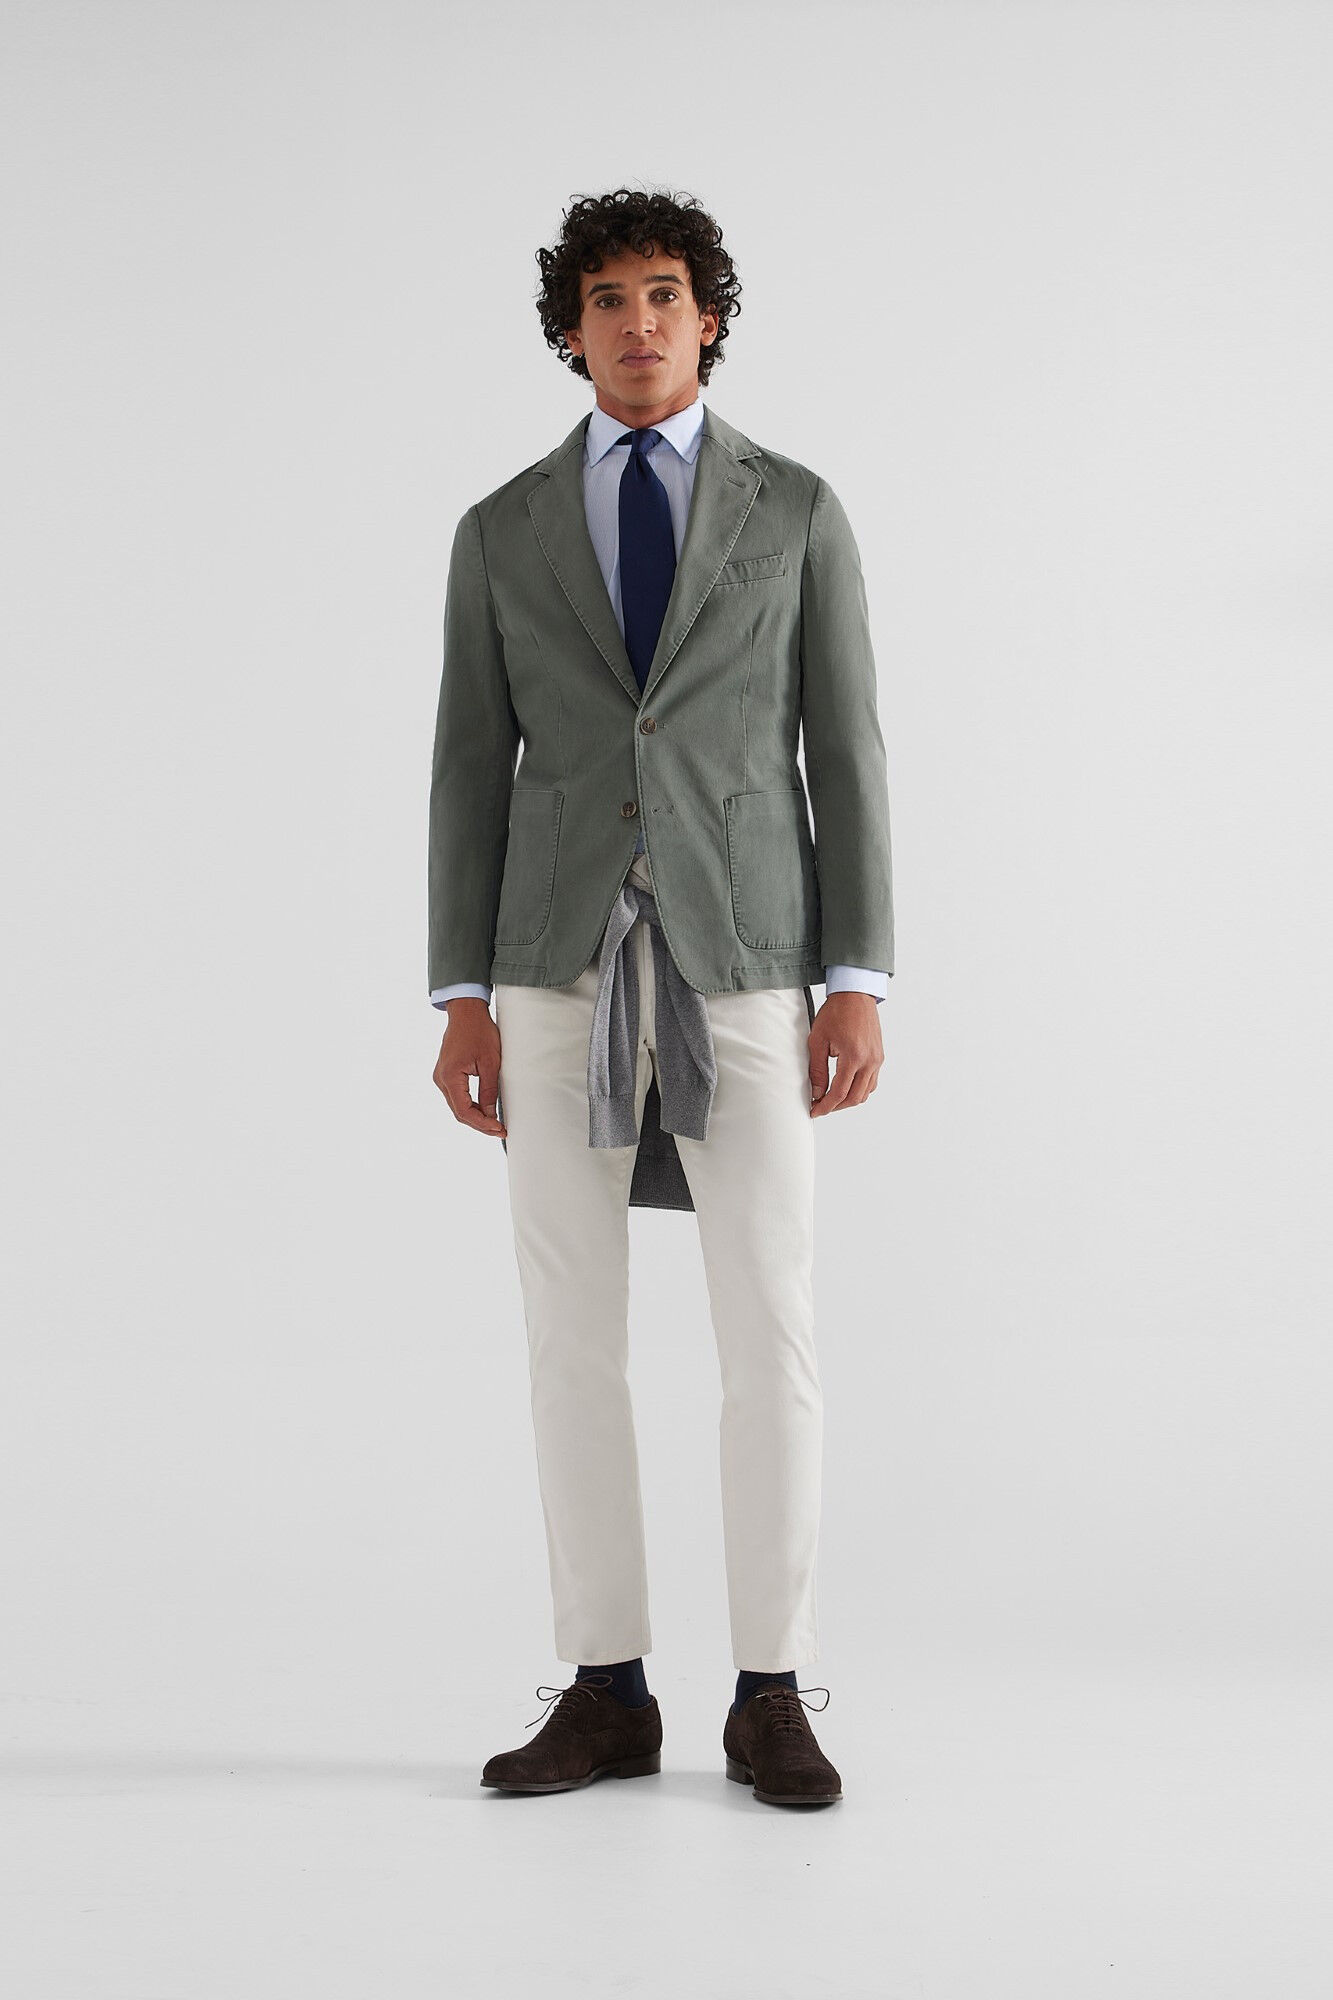 Grey Blazer - What color pants? And suggestions for tie and/or shirt? :  r/malefashionadvice